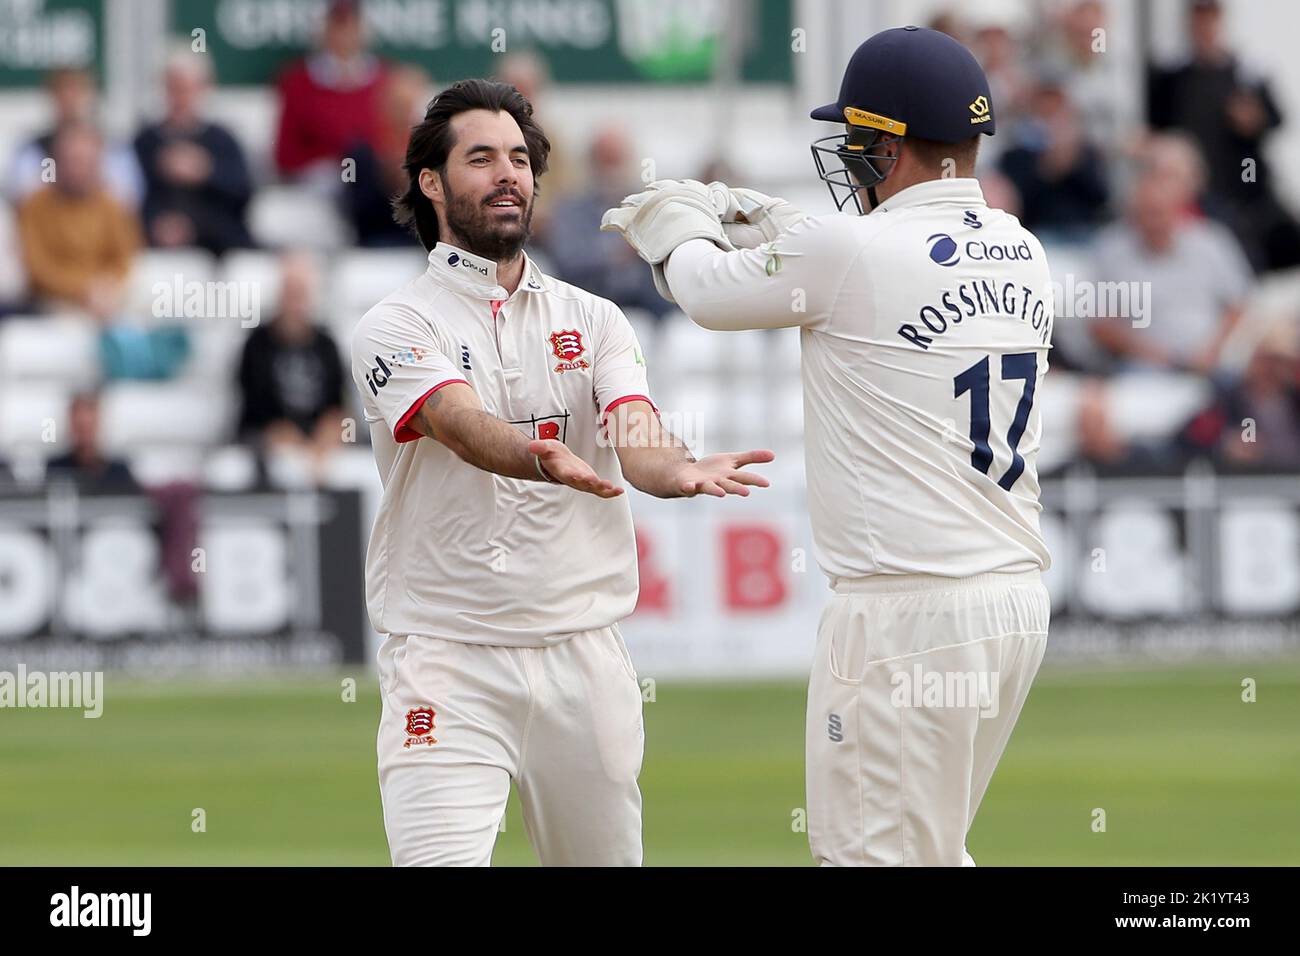 Shane Snater of Essex celebrates taking the wicket of Keaton Jennings during Essex CCC vs Lancashire CCC, LV Insurance County Championship Division 1 Stock Photo